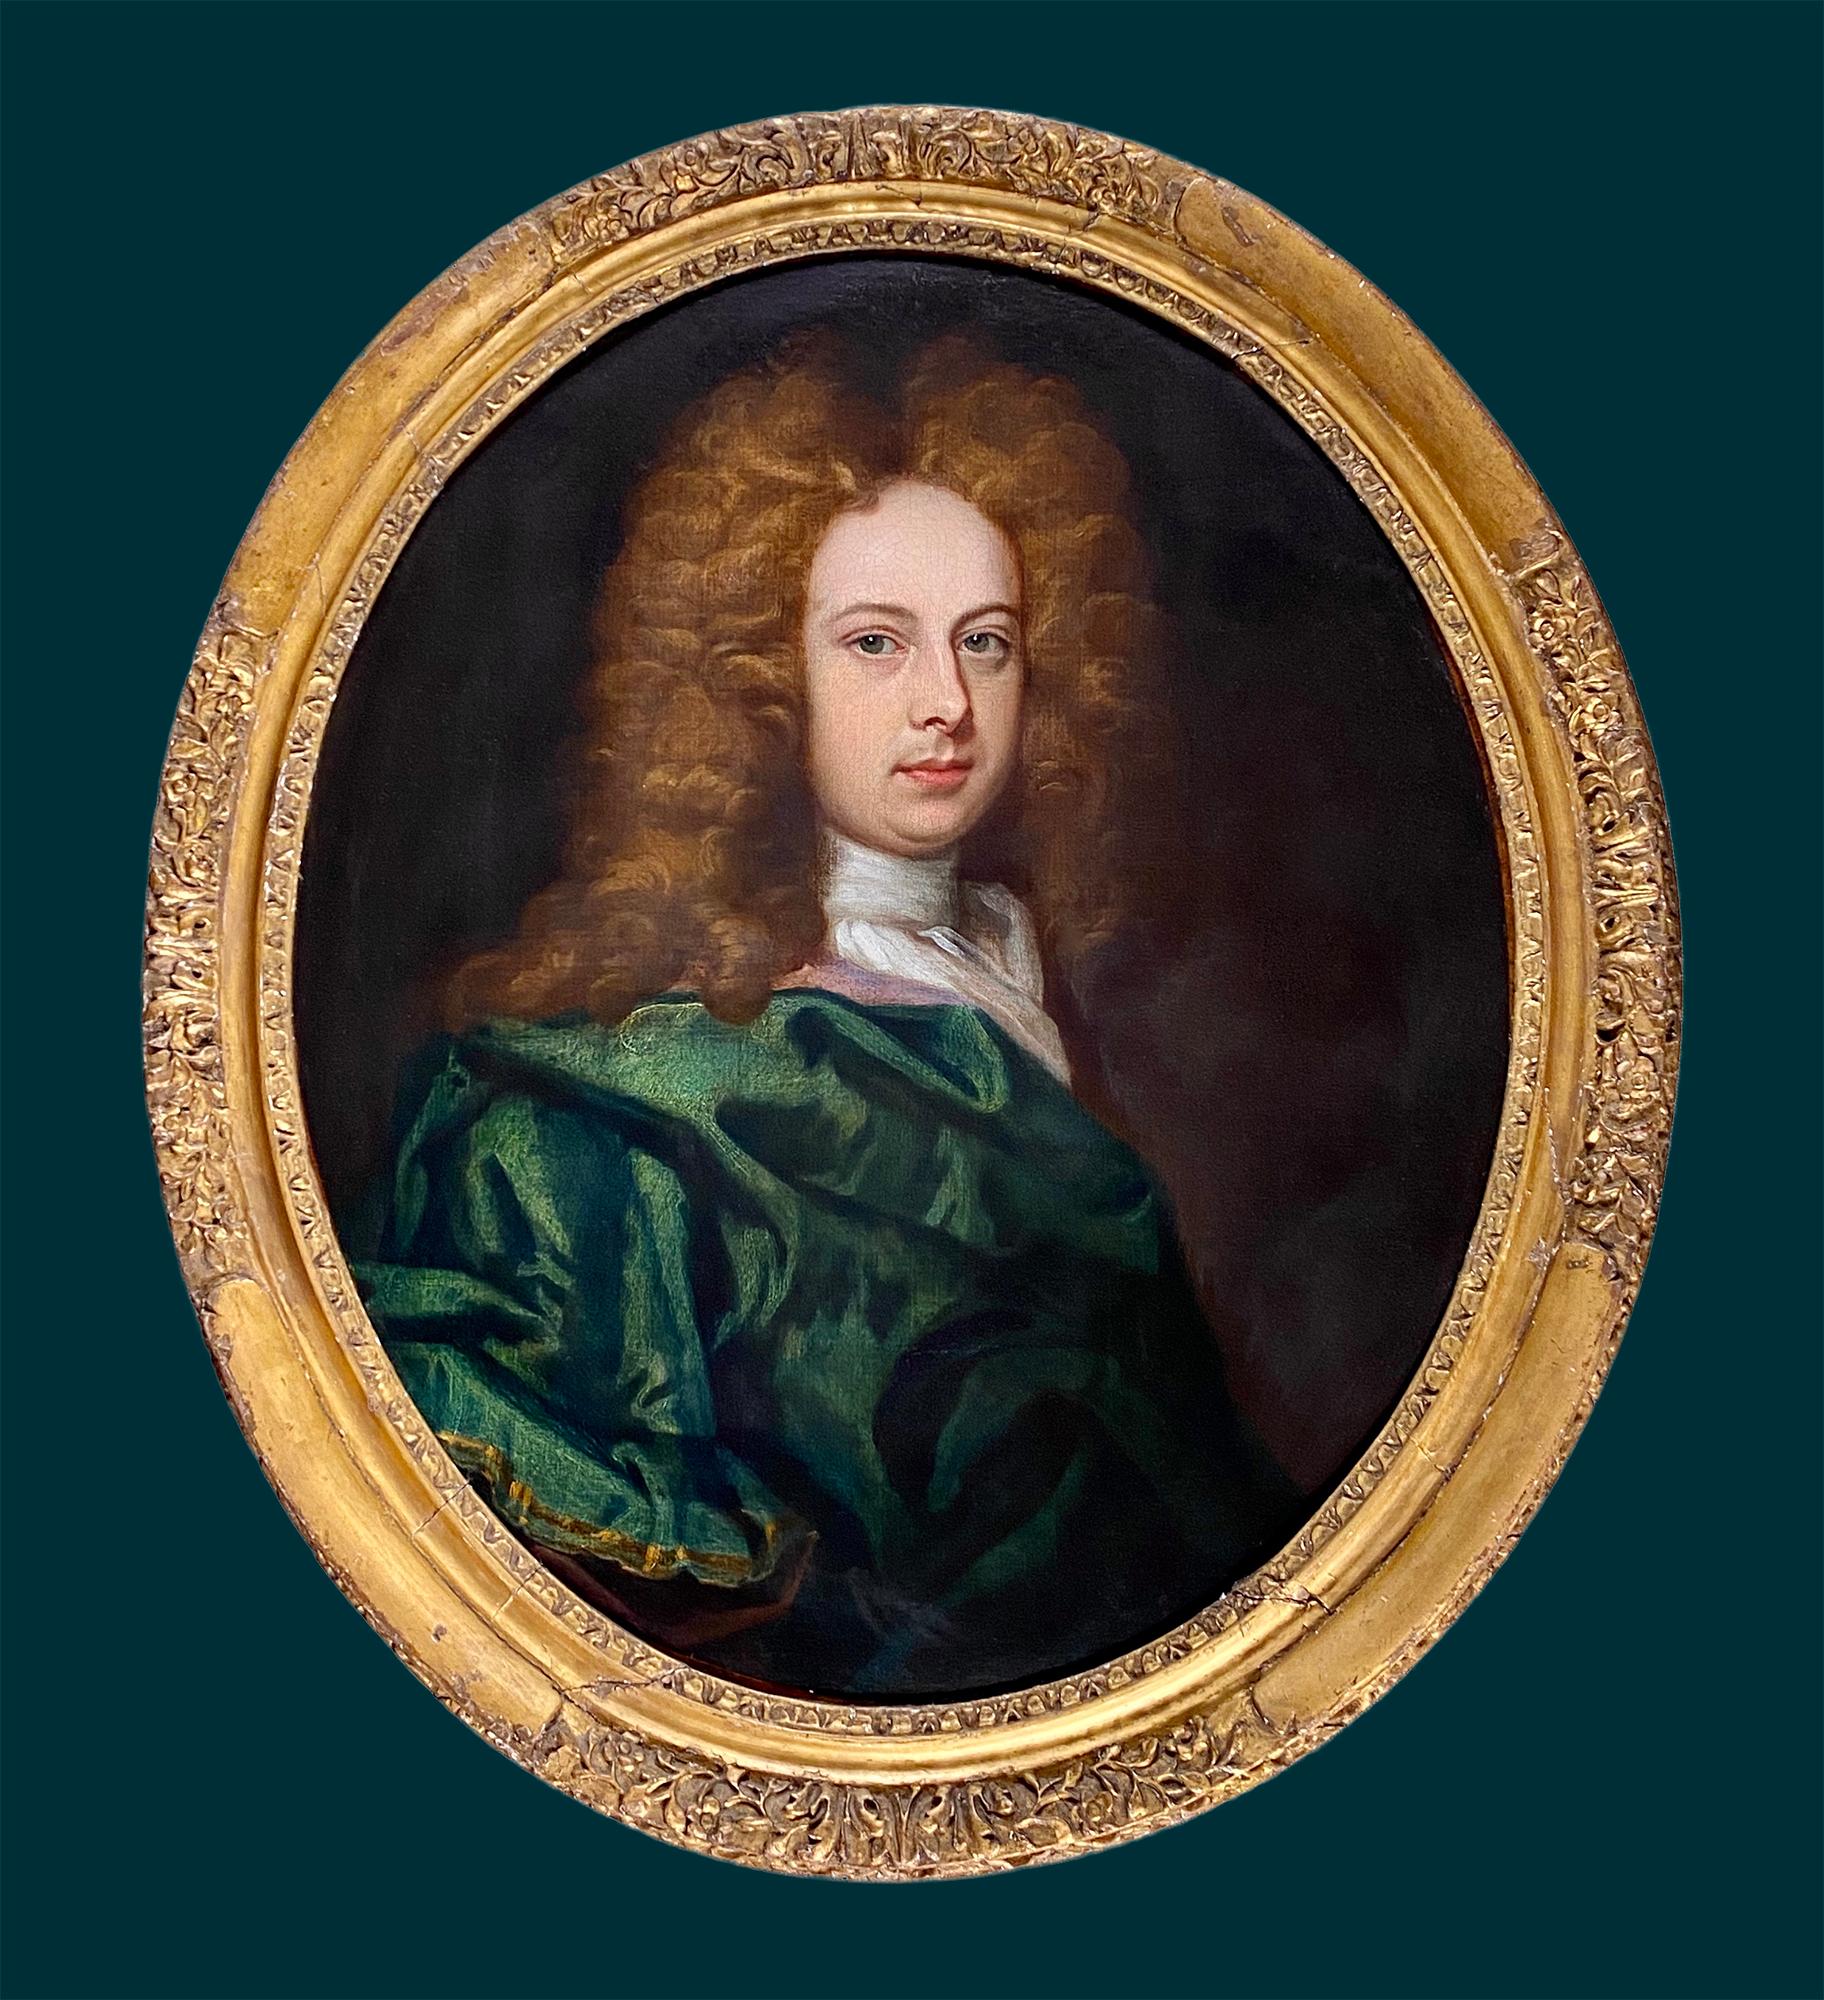 A fine, sensitively rendered and highly decorative portrait of a handsome gentleman circa 1690 by an artist in the circle of Johann Kerseboom. The handsome green eyed young gentleman is pictured half length within the oval and with his head slightly